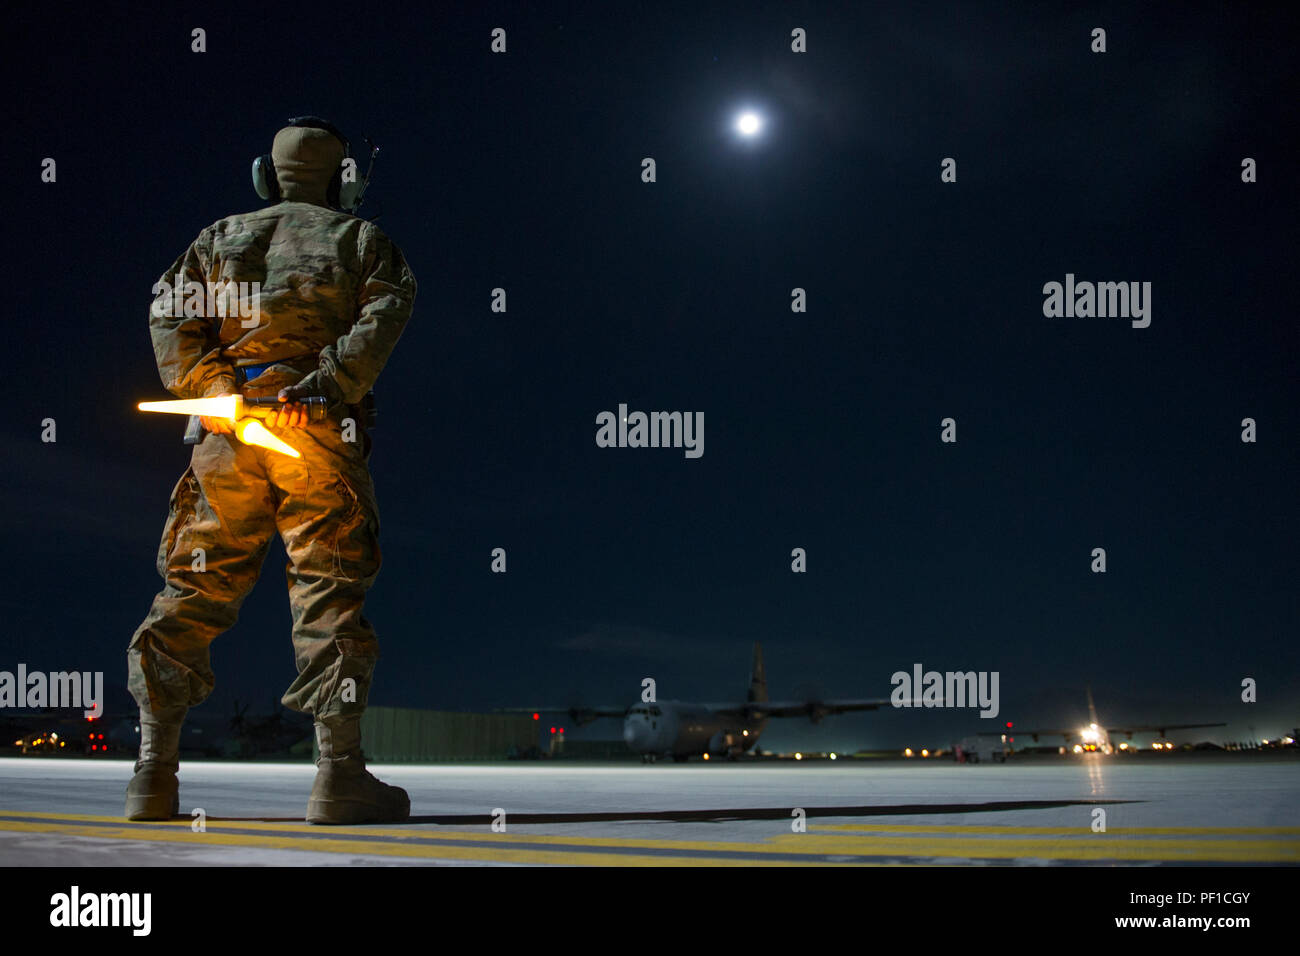 Senior Airman Alec Flores, 455th Expeditionary Aircraft Maintenance Squadron crew chief, prepares to guide a C-130J Super Hercules on to a taxiway as it leaves on a night sortie at Bagram Air Field, Afghanistan, Feb. 22, 2016. The 455th EAMXS ensures that aircraft at Bagram are prepared for flight and return them to a mission-ready state once they land. (U.S. Air Force photo/Tech. Sgt. Robert Cloys) Stock Photo